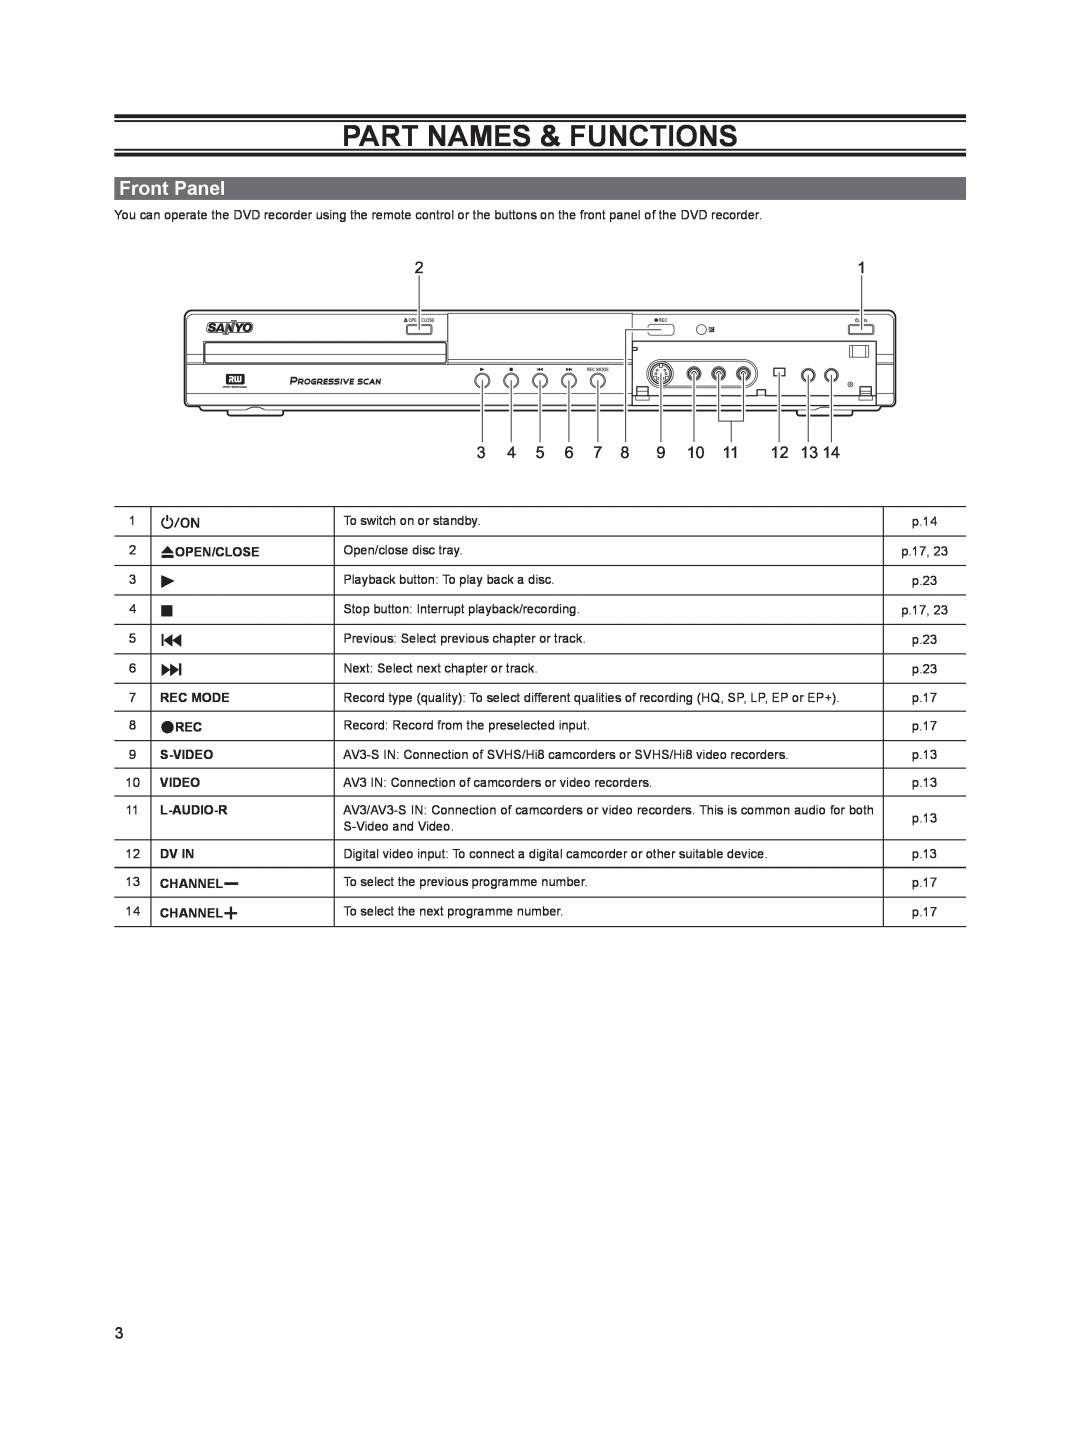 Sanyo DVR-HT120 instruction manual Part Names & Functions, Front Panel 